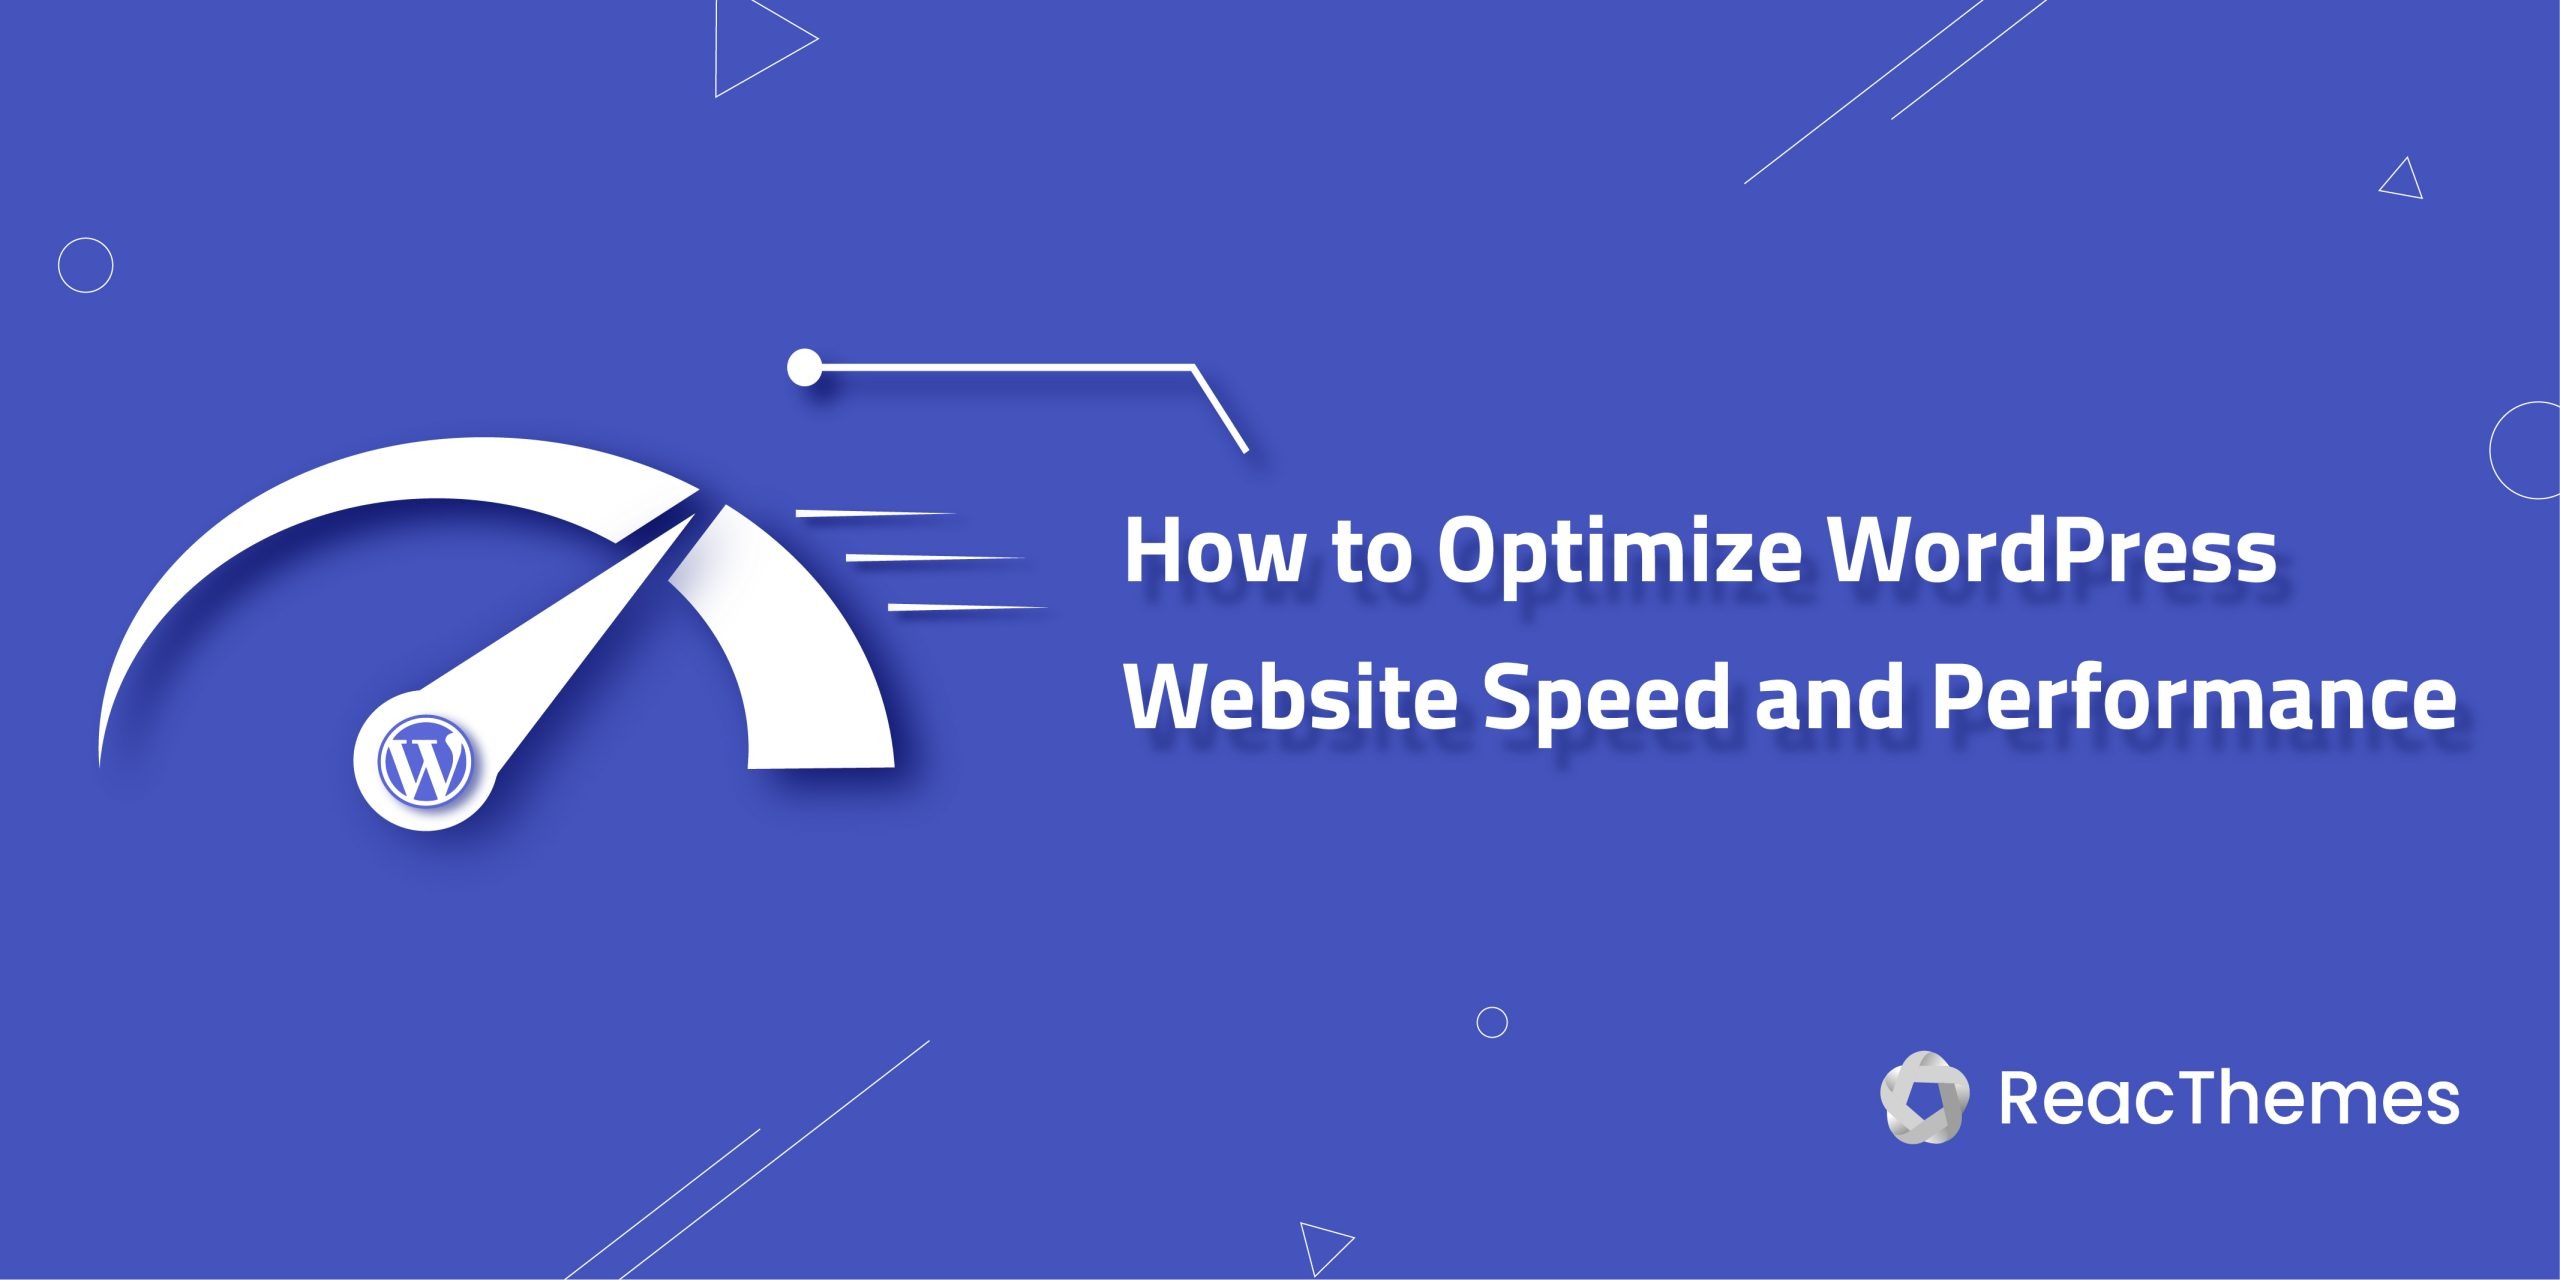 How to Optimize WordPress Website Speed and Performance - Reacthemes